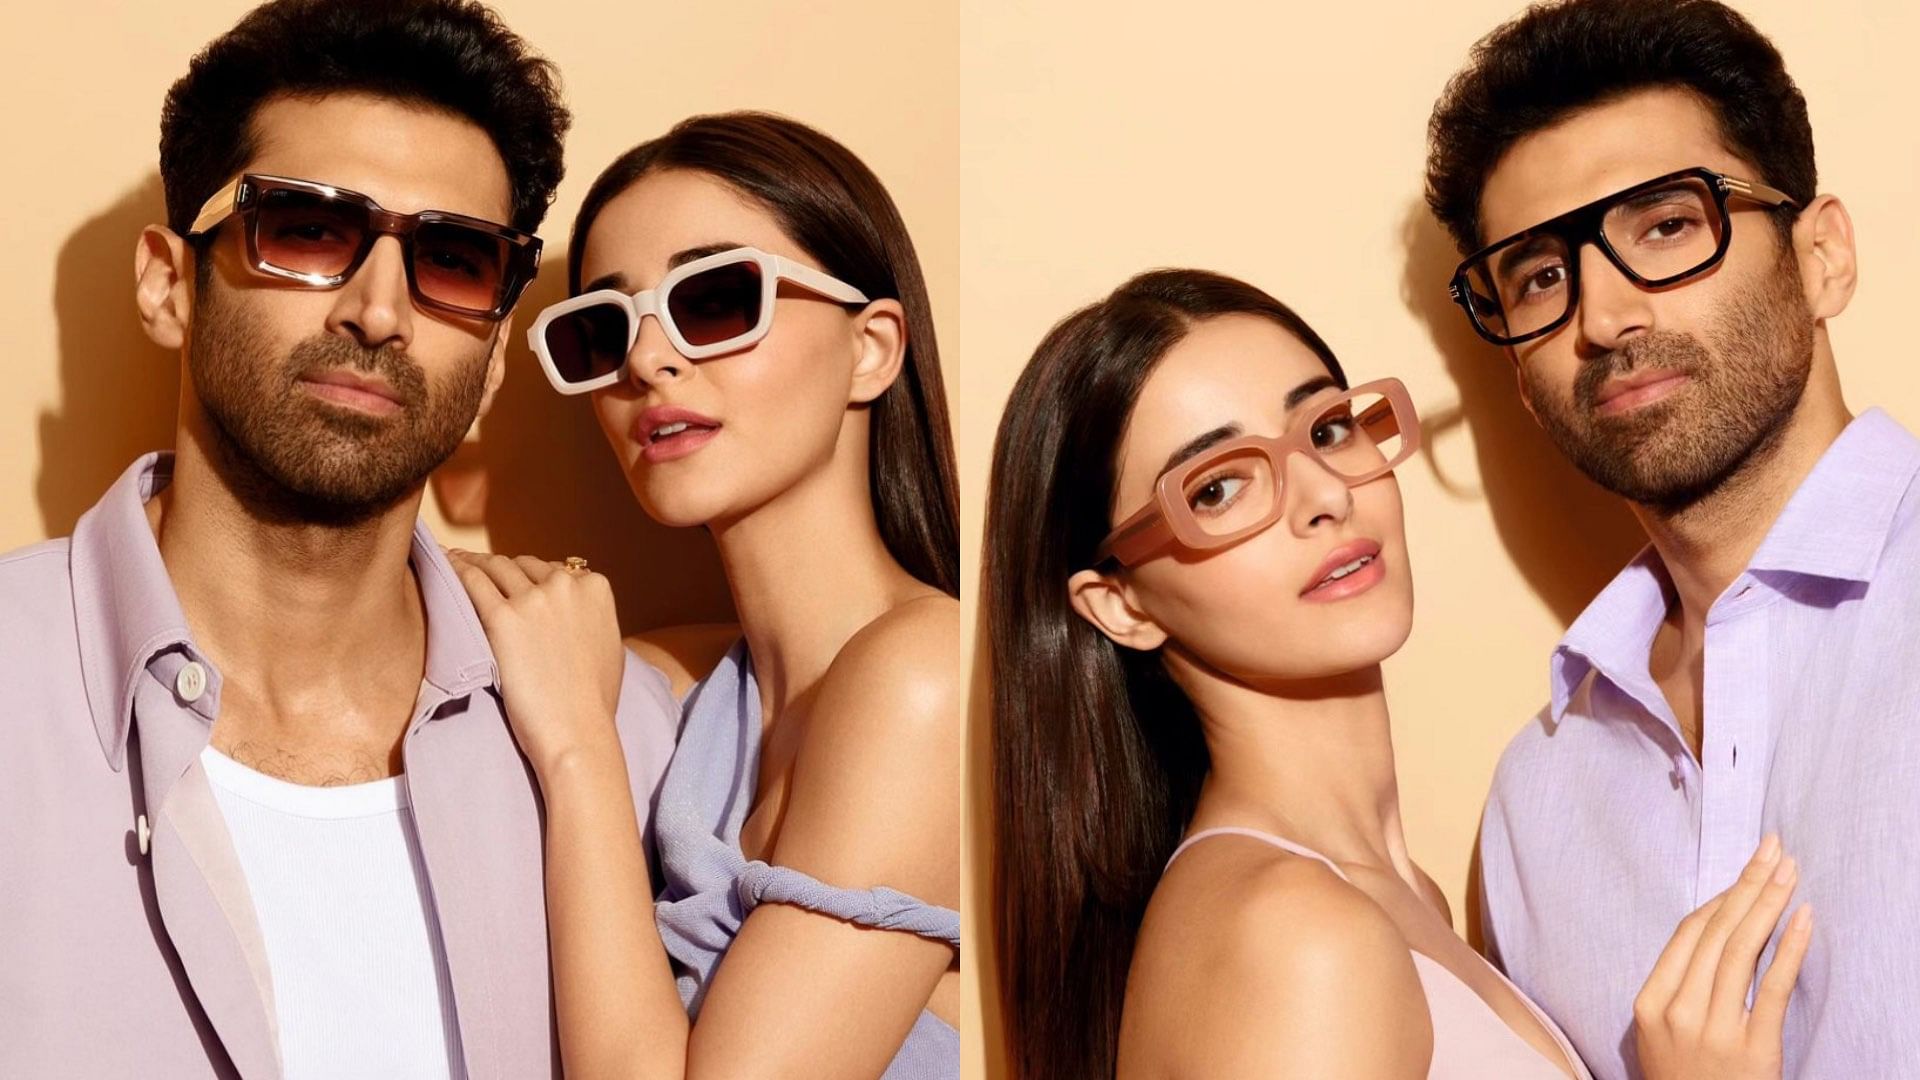 Actors Ananya Pandey and Aditya Roy Kapur are back together ad fans are excited about the couple